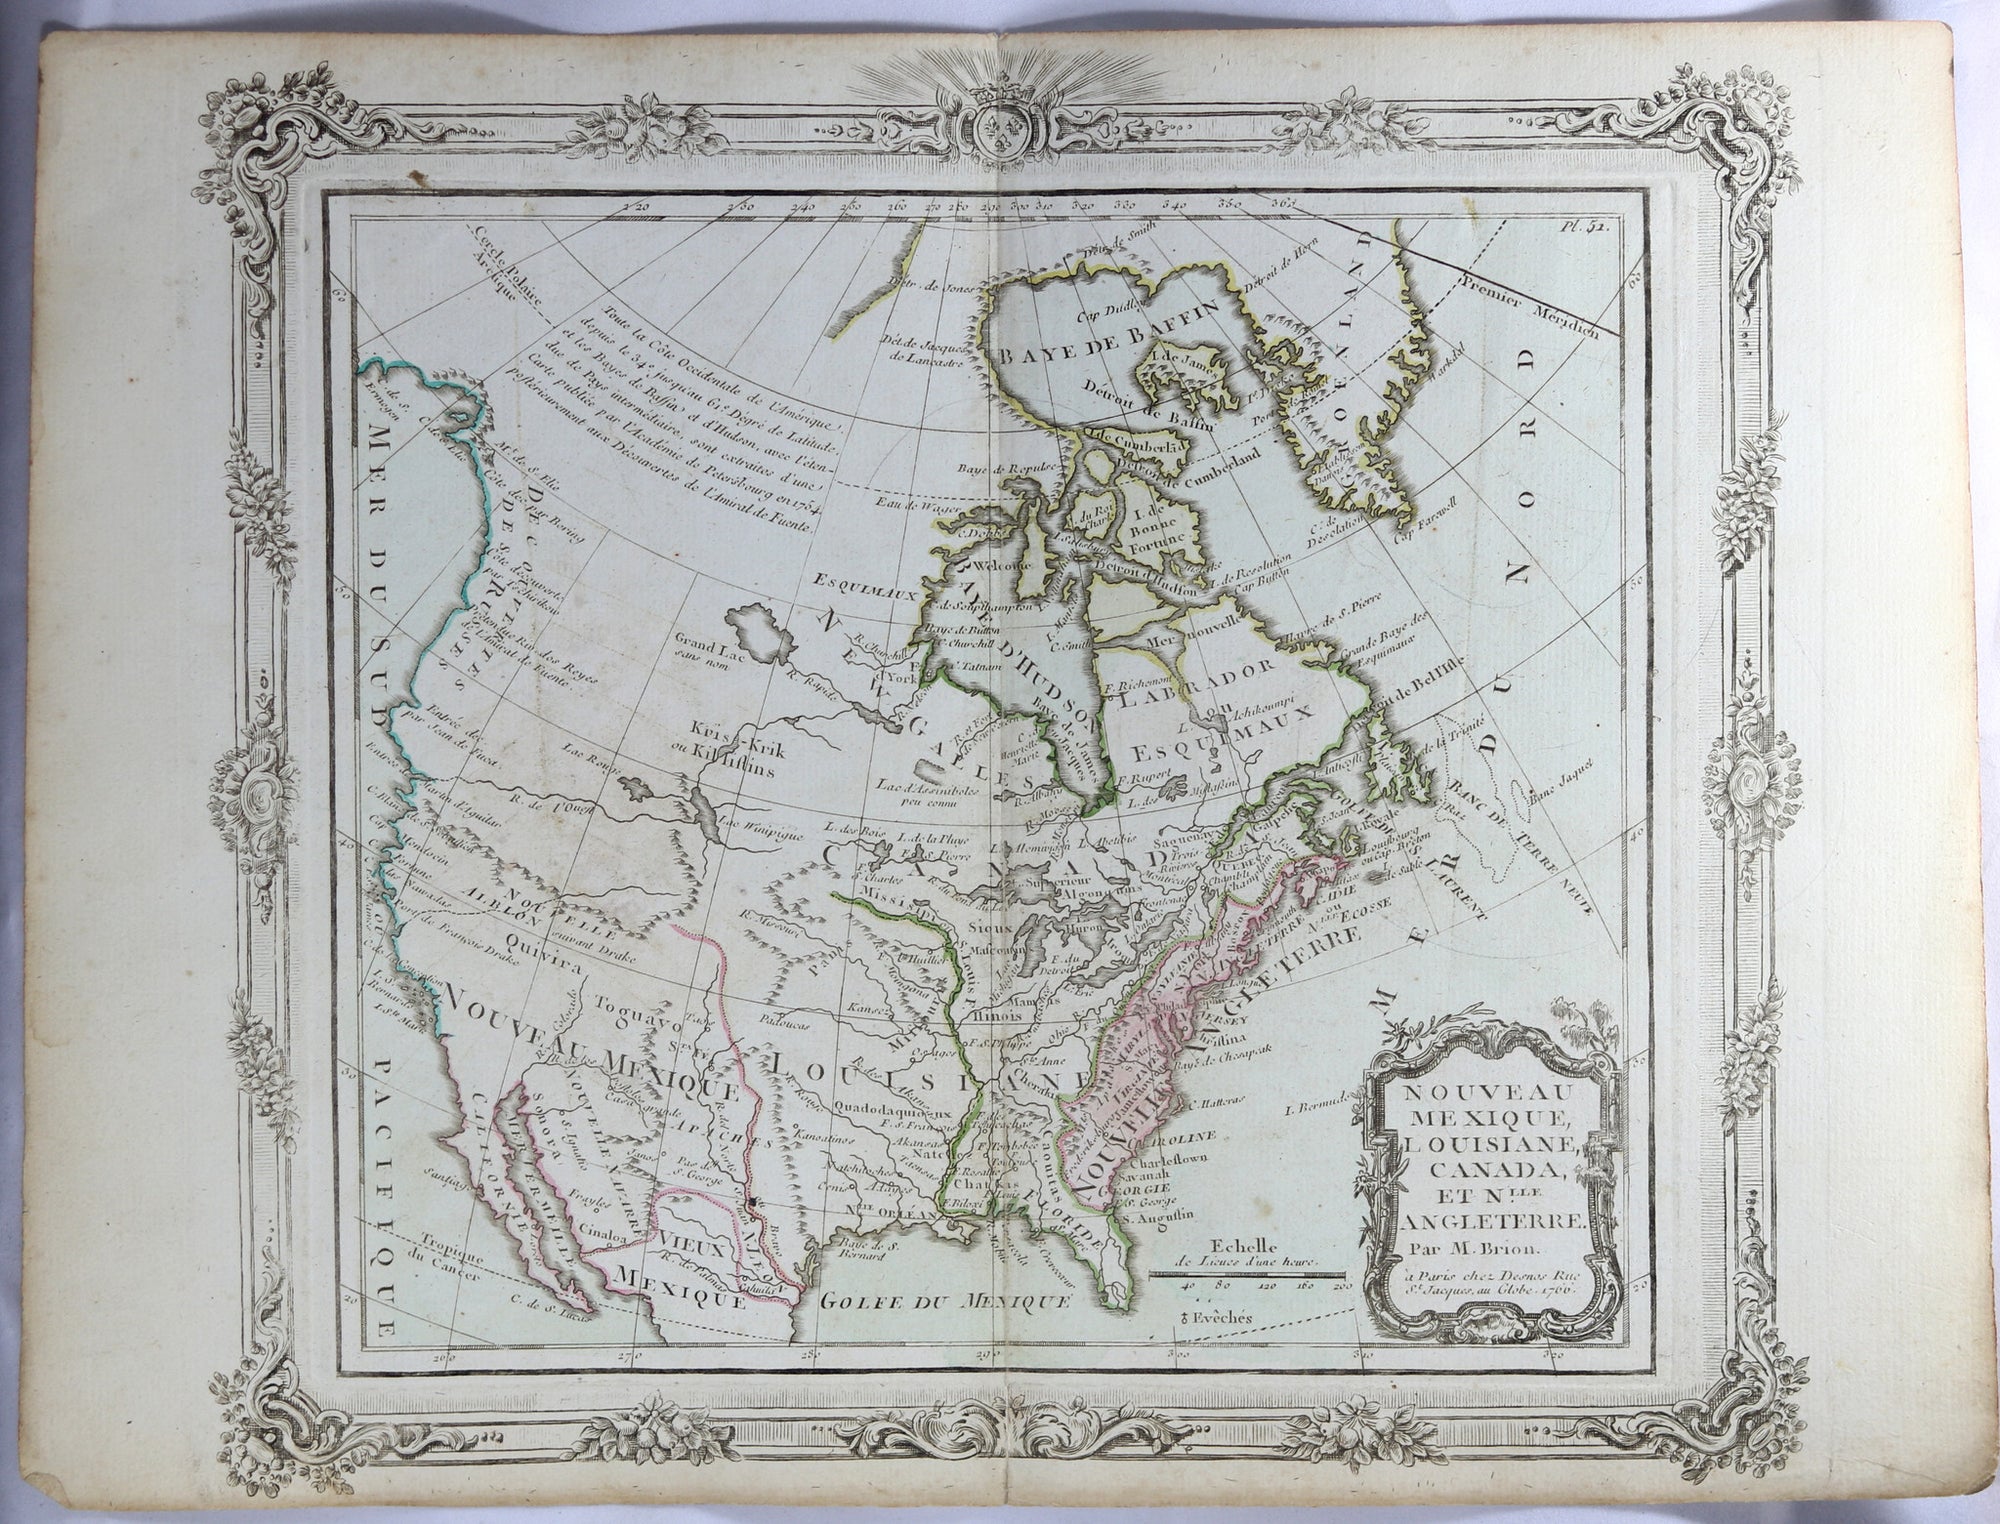 1766 Brion map of New Mexico, Lousiana, Canada and New England